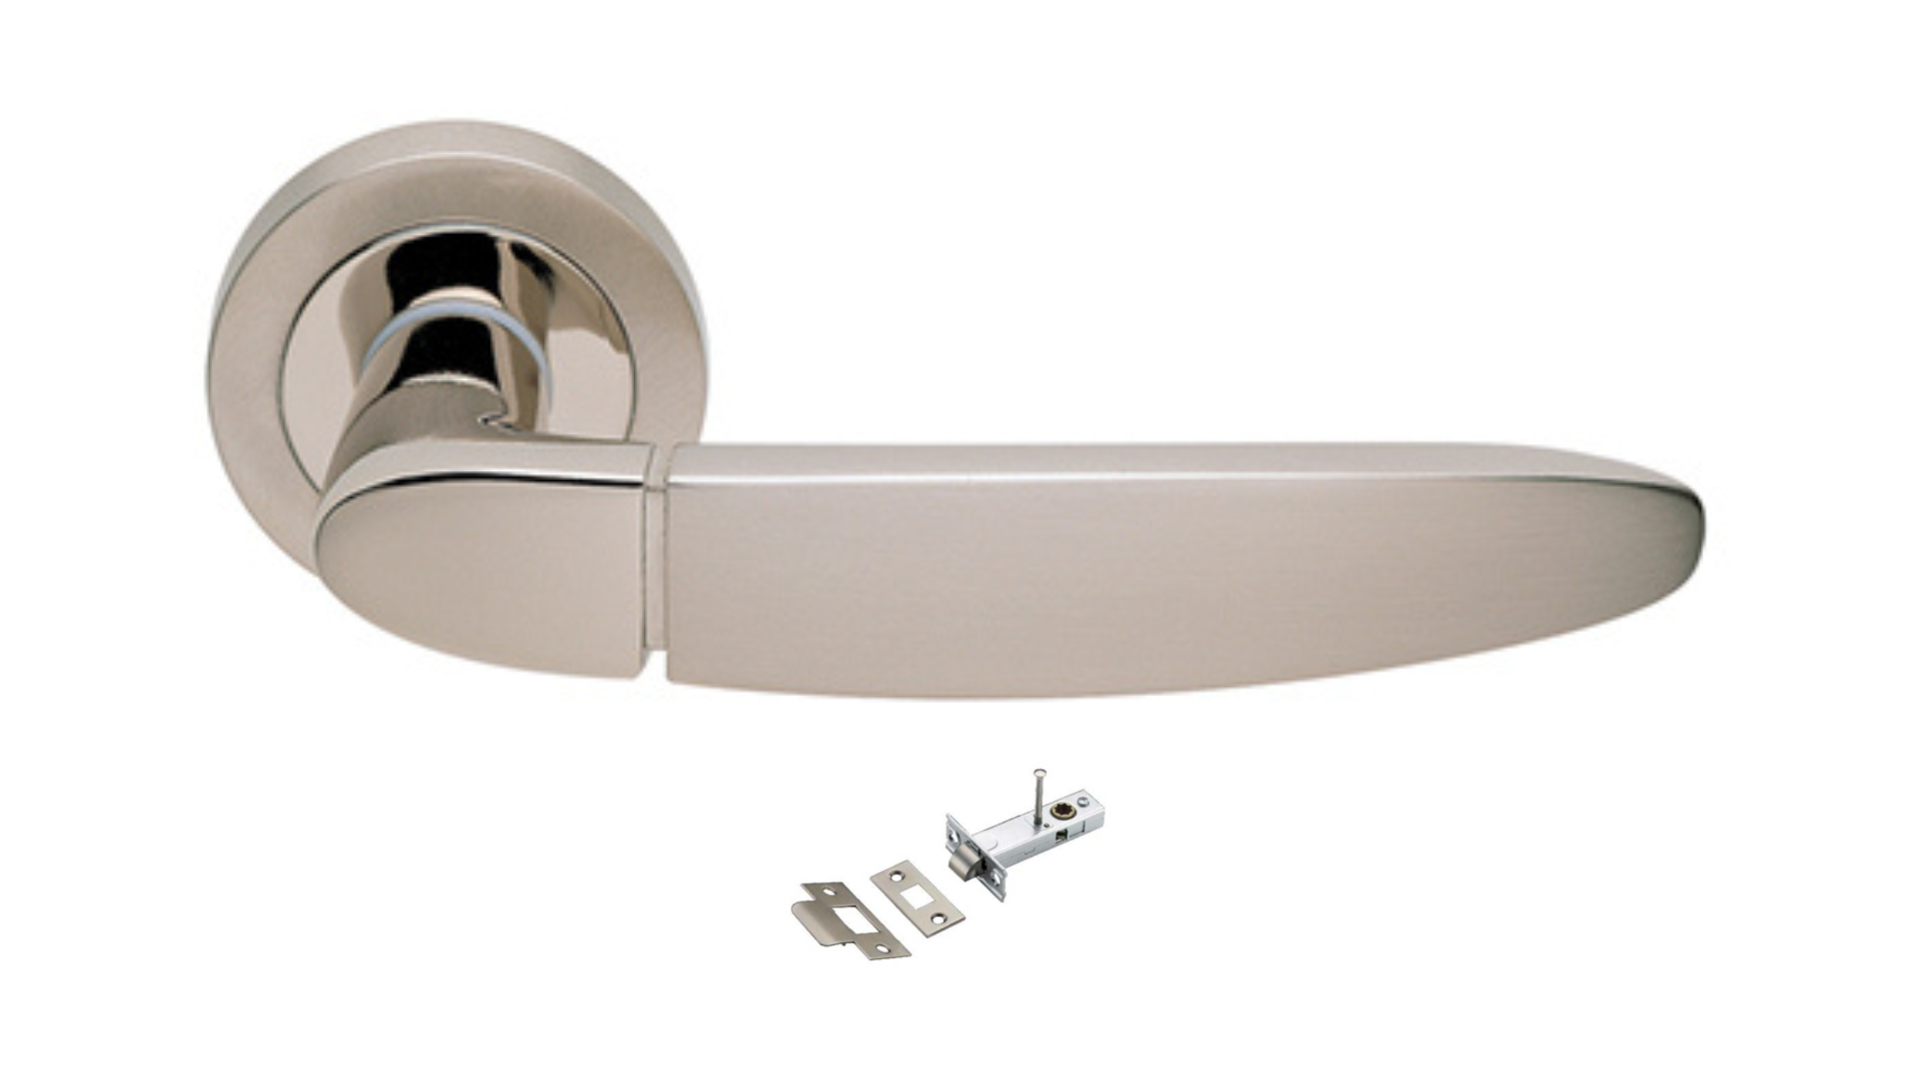 The Atena door handle in Satin Nickel and Nickel Plate with privacy latch included on a white background.